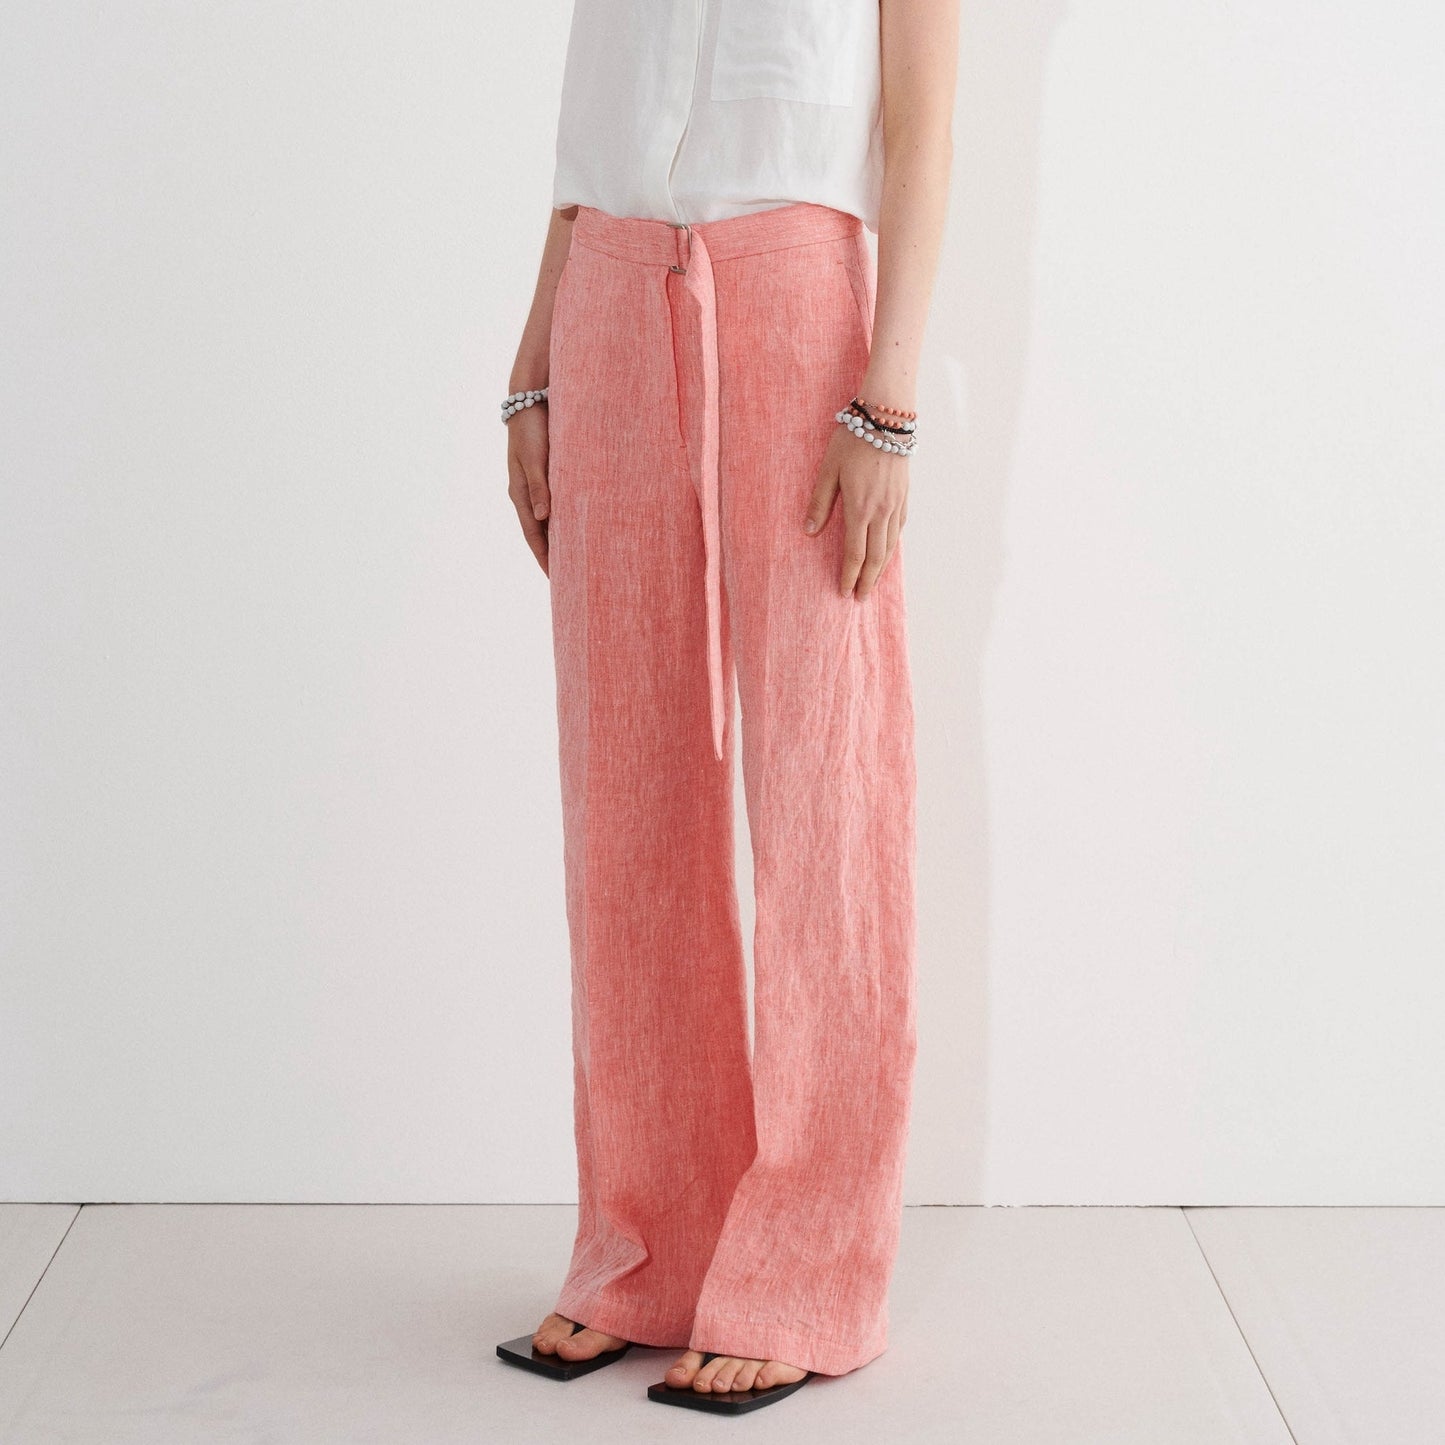 Phenyo Belted Pant in Coral Melange